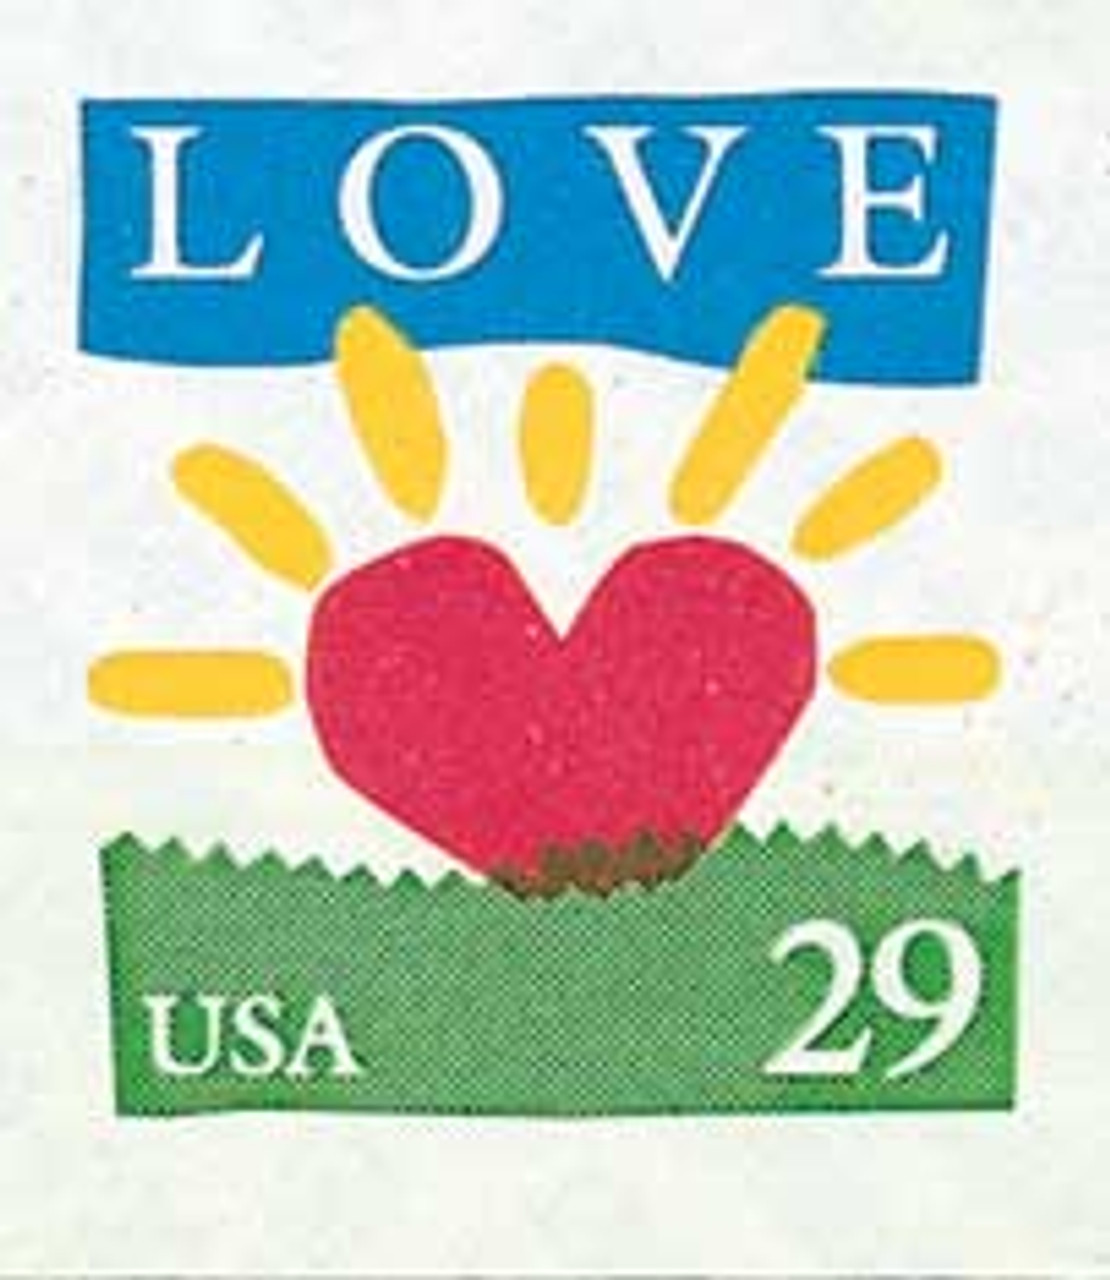 10 Earth Love Stamps Vintage Heart Shaped Planet Earth from Space